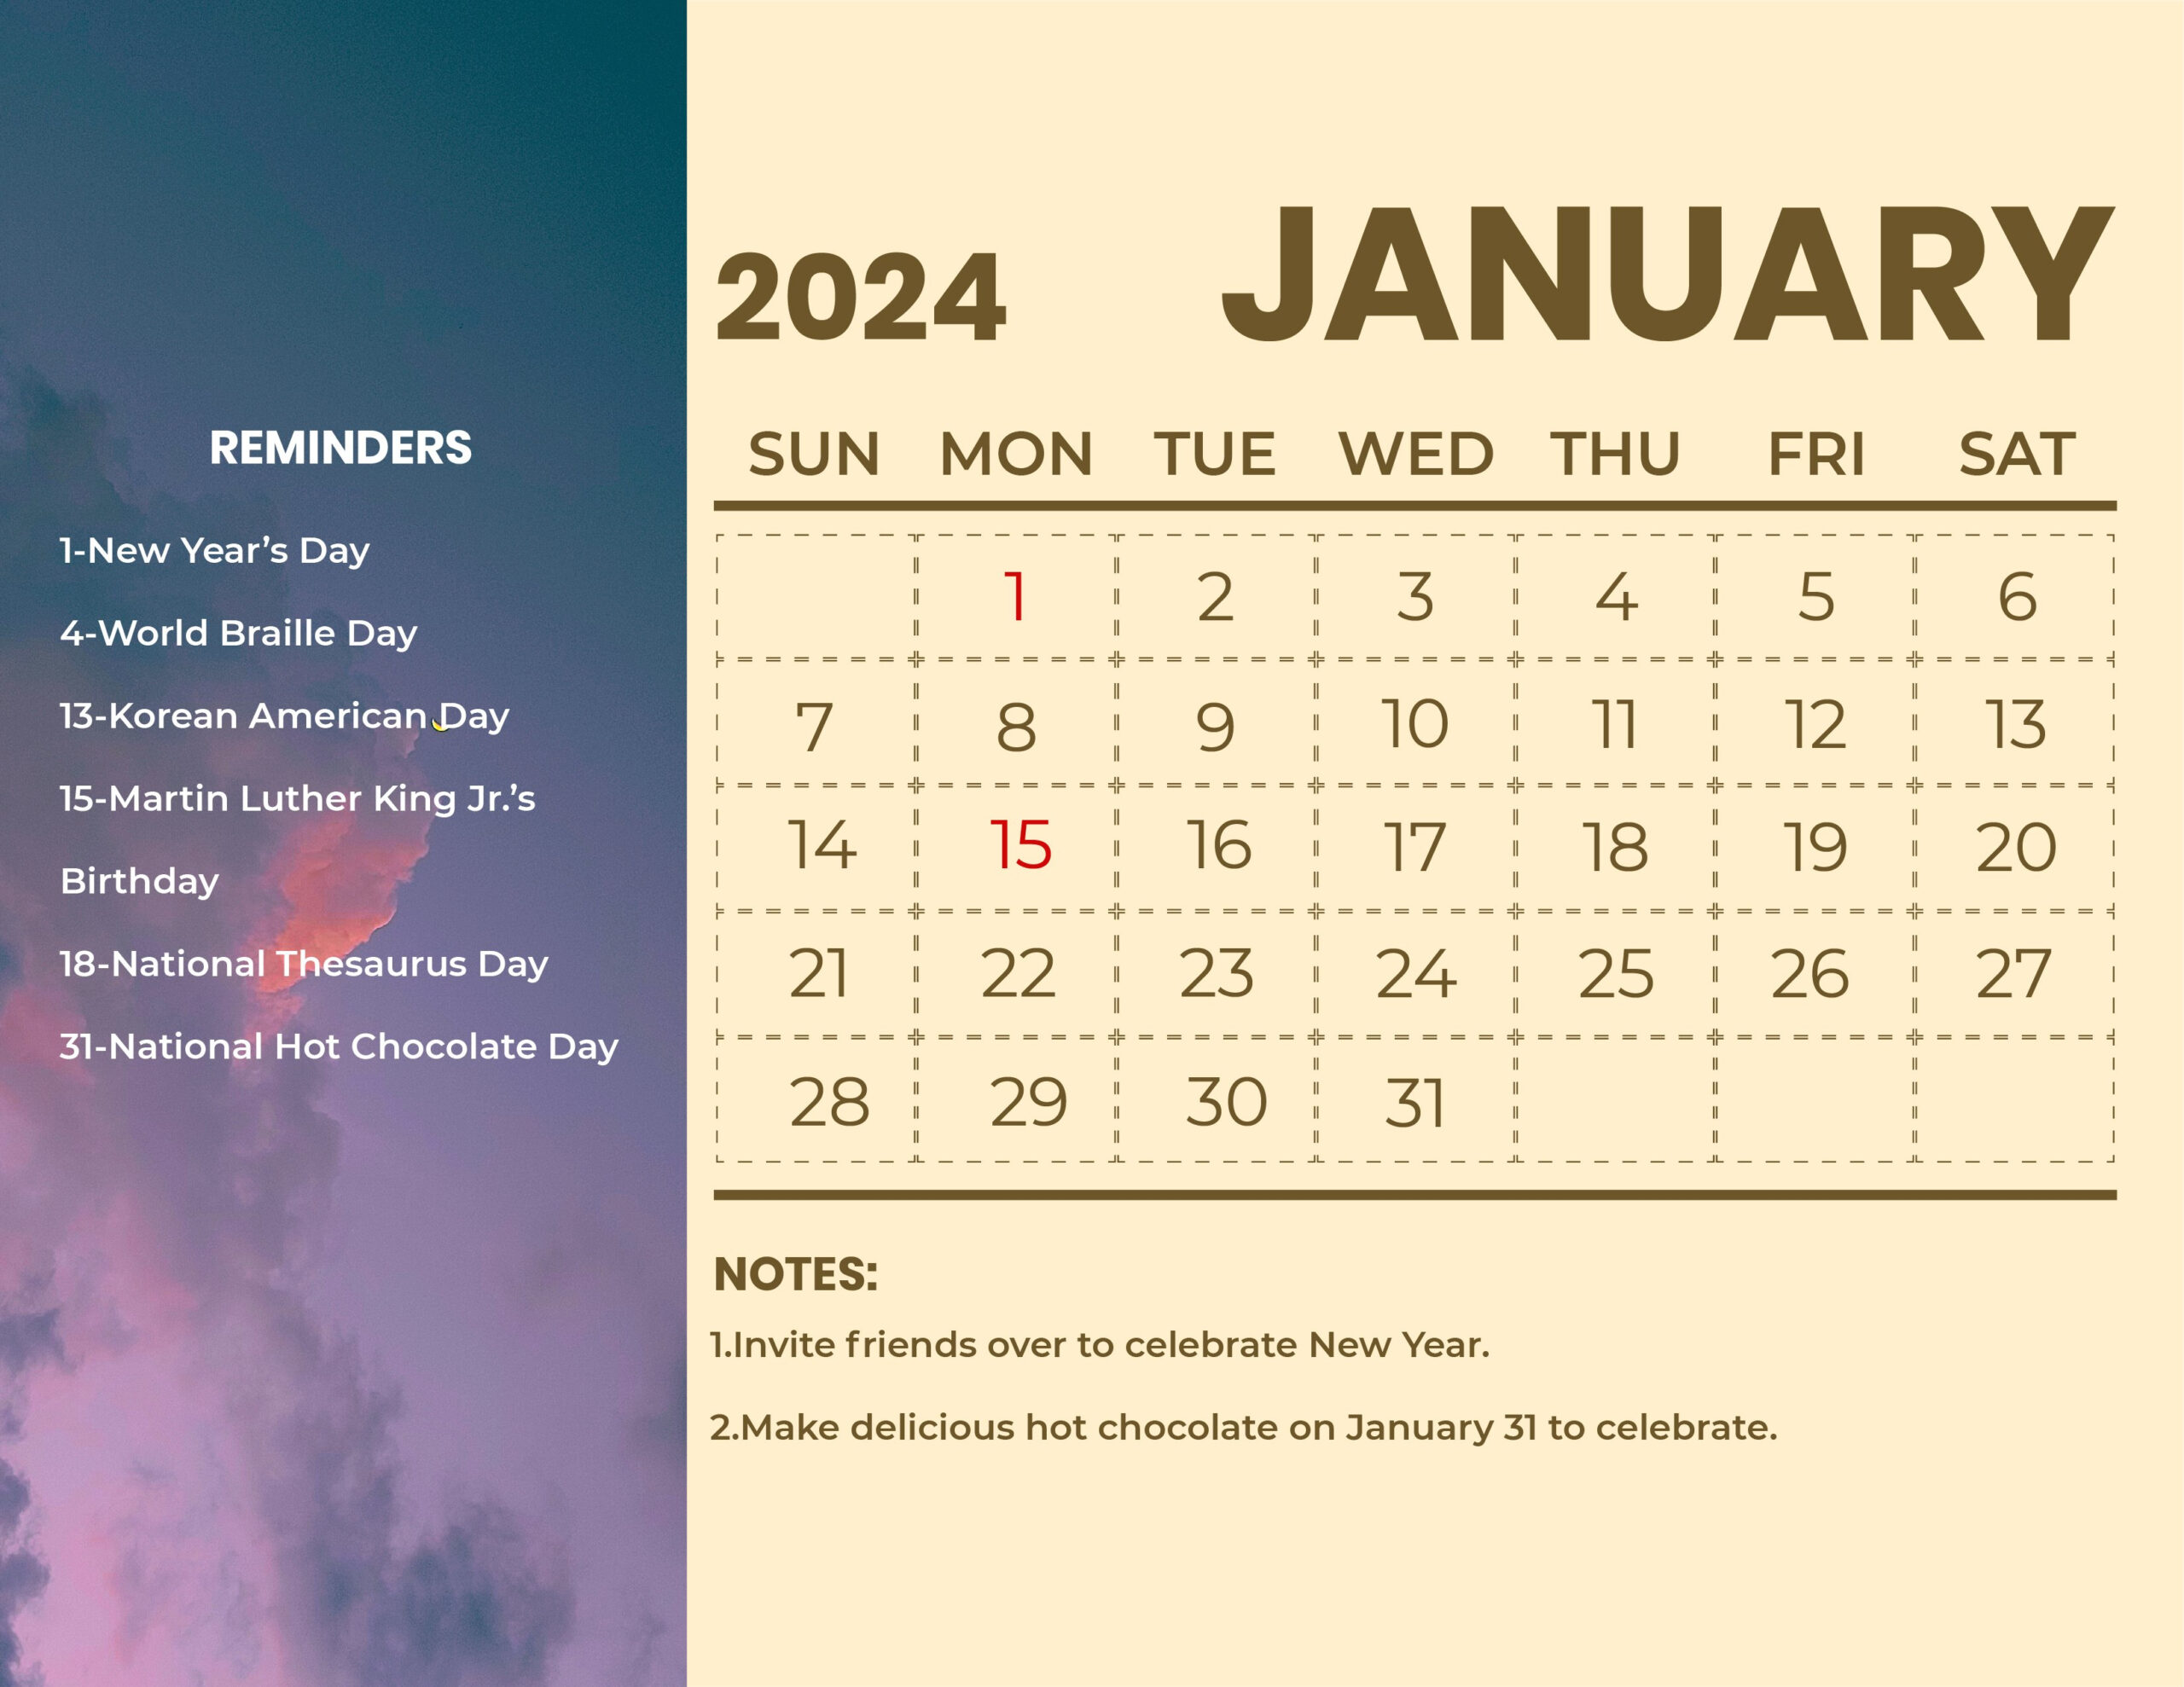 January 2024 Calendar With Holidays - Download In Word for Free Printable January 2024 Calendar With Holidays